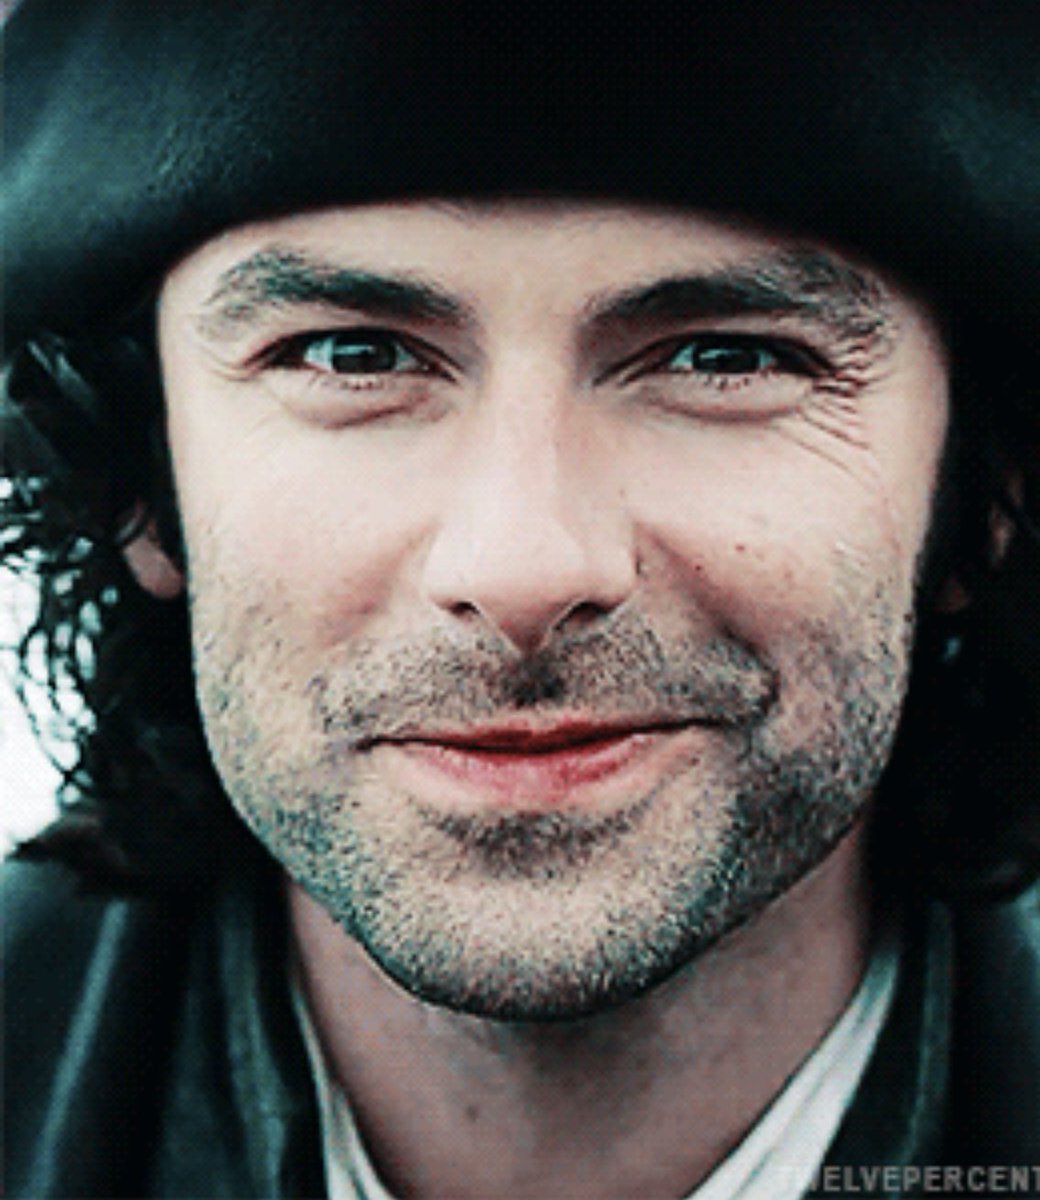 Have a delightful #TricornTuesday everyone. #AidanTurner #AidanCrew #Ross. (Photo credit to owner TwelvePercent)🩵